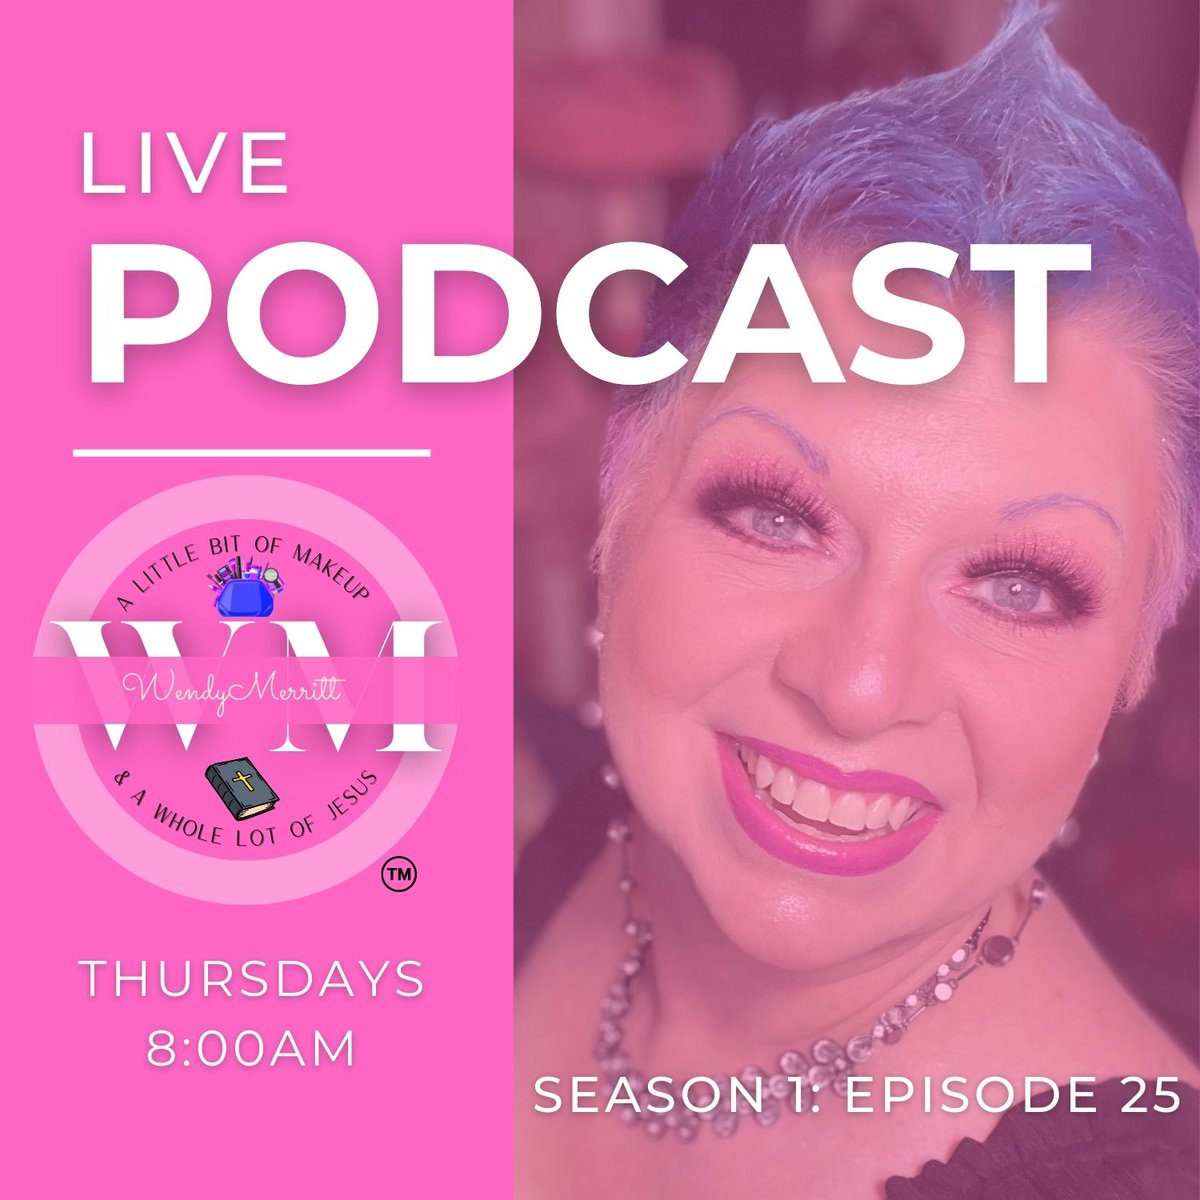 Get ready for episode 25. We are about 30-minutes to live! See you right back here at 8:00 or on YouTube!

youtube.com/live/3vS62LNGv…

#podcast #bibleverse #littlebitofmakeup #wholelotofjesus #scripturememory #scriptureverse #memoryverse #makeuptutorial #makeuplesson #womenover50